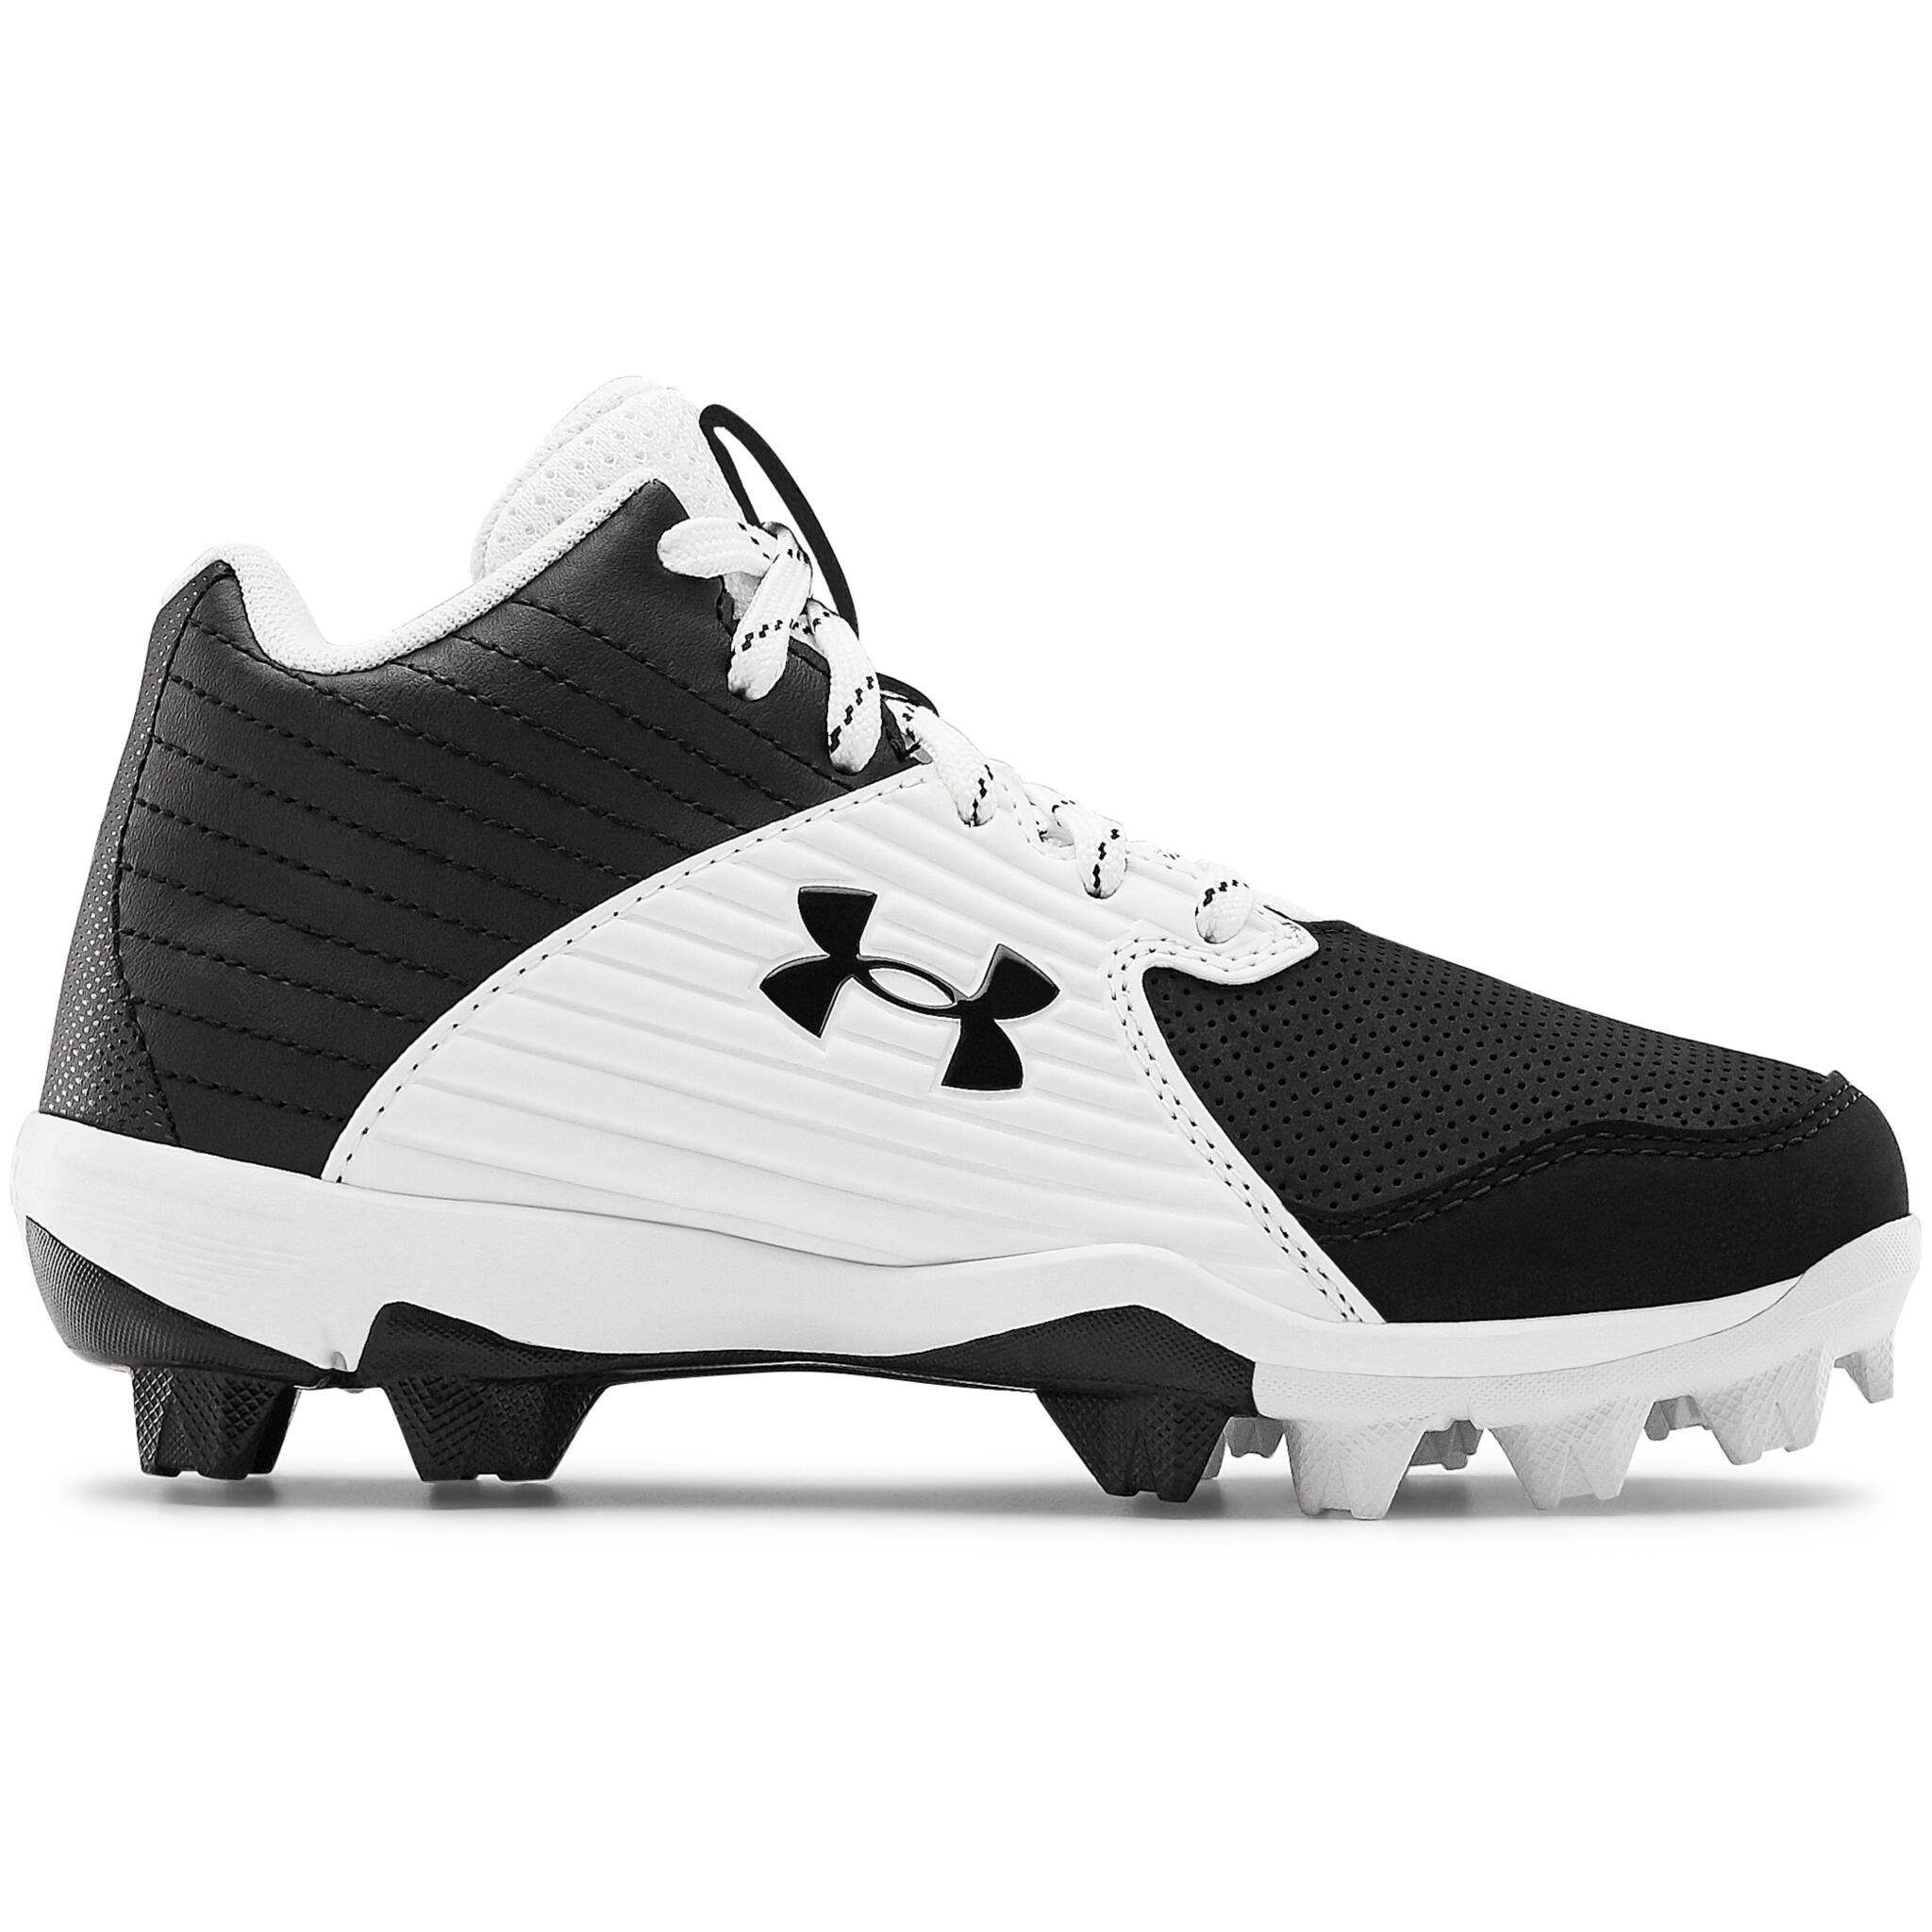 Under Armour Leadoff Mid Junior Baseball Cleats Source Sports